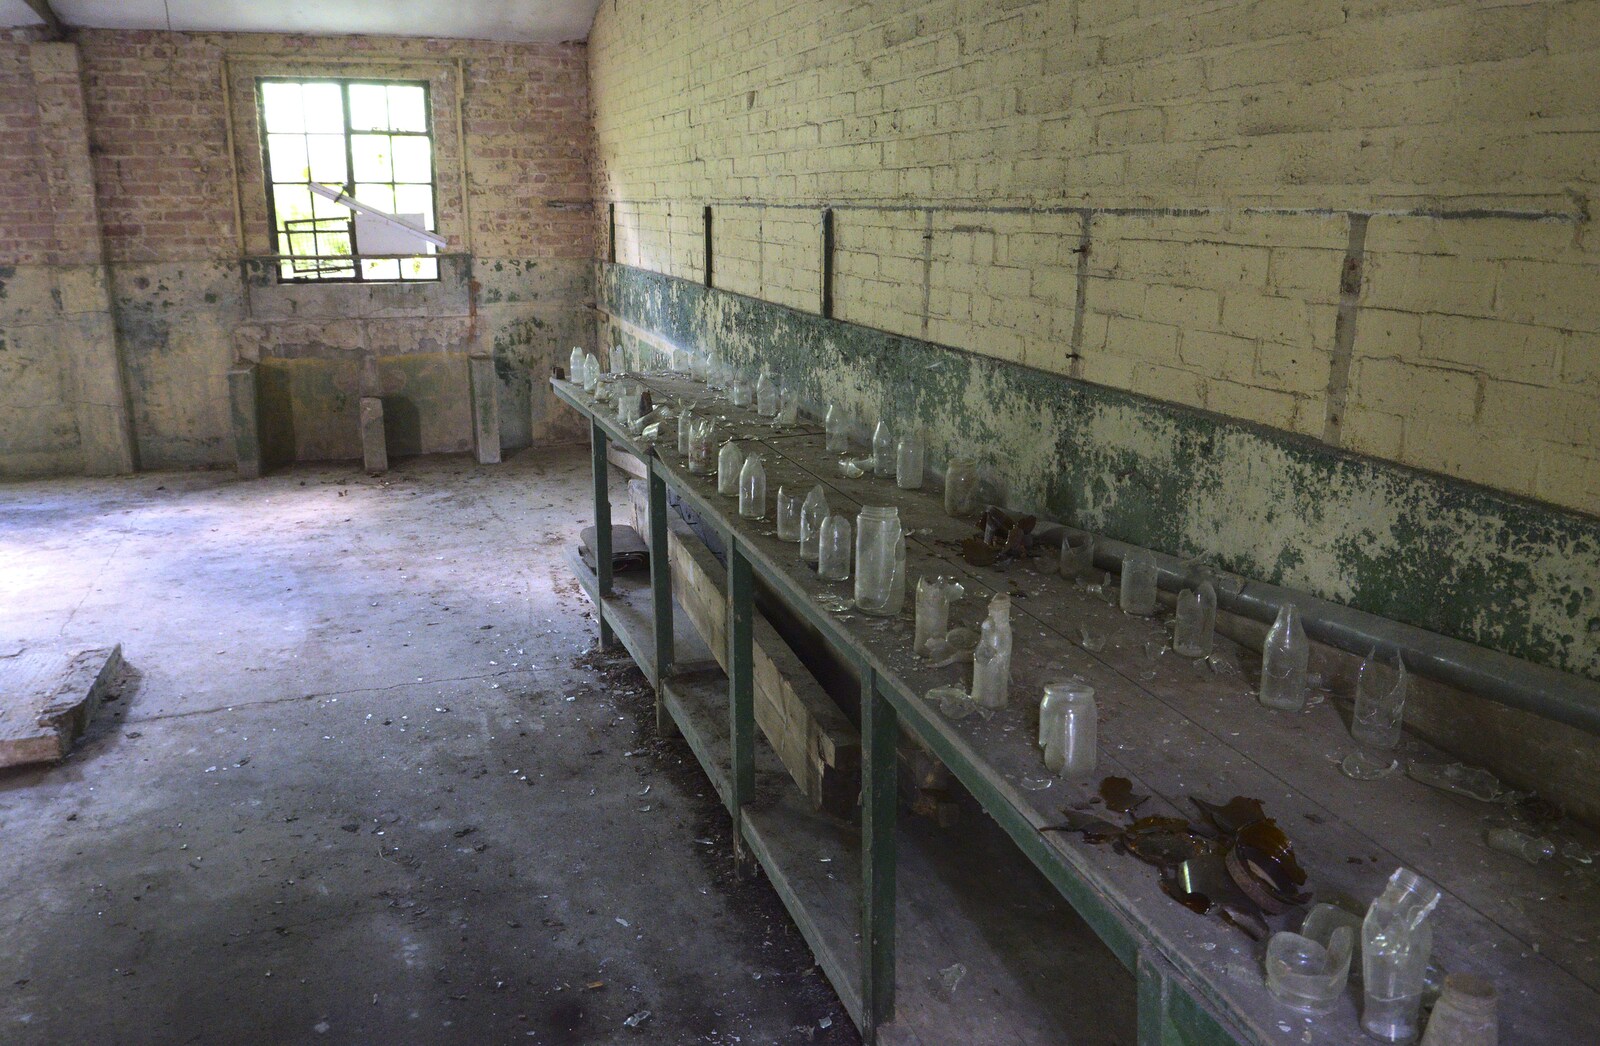 Bottles lined up on a shelf from A 1940s Timewarp, Site 4, Bungay Airfield, Flixton, Suffolk - 9th June 2022